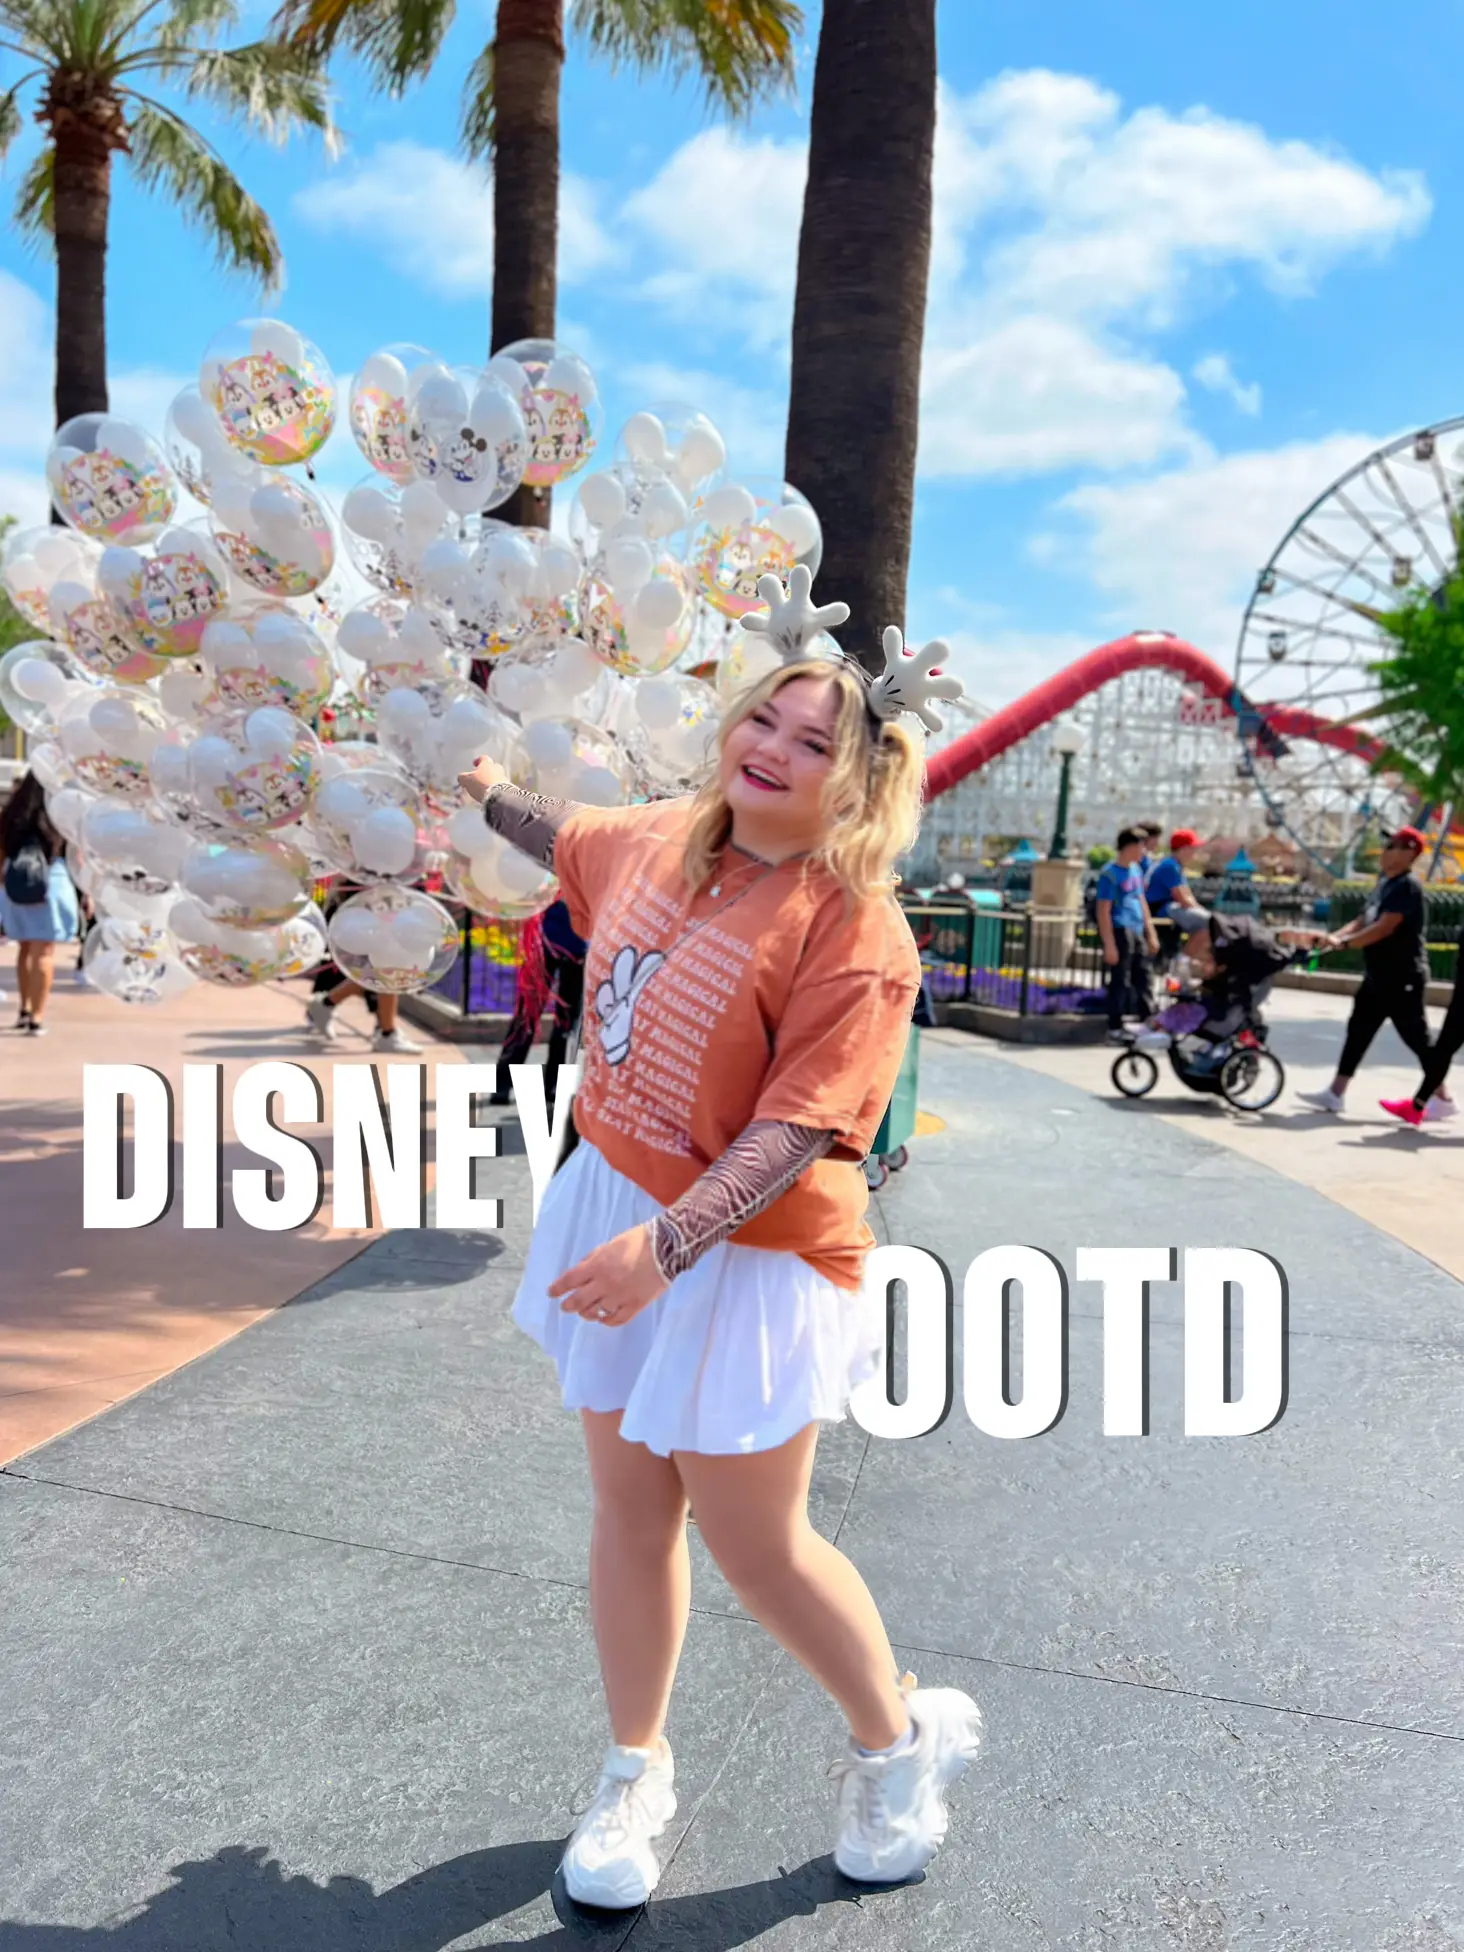 Disney outfits are so much fun! ✨ #disneyootd #disneyoutfits